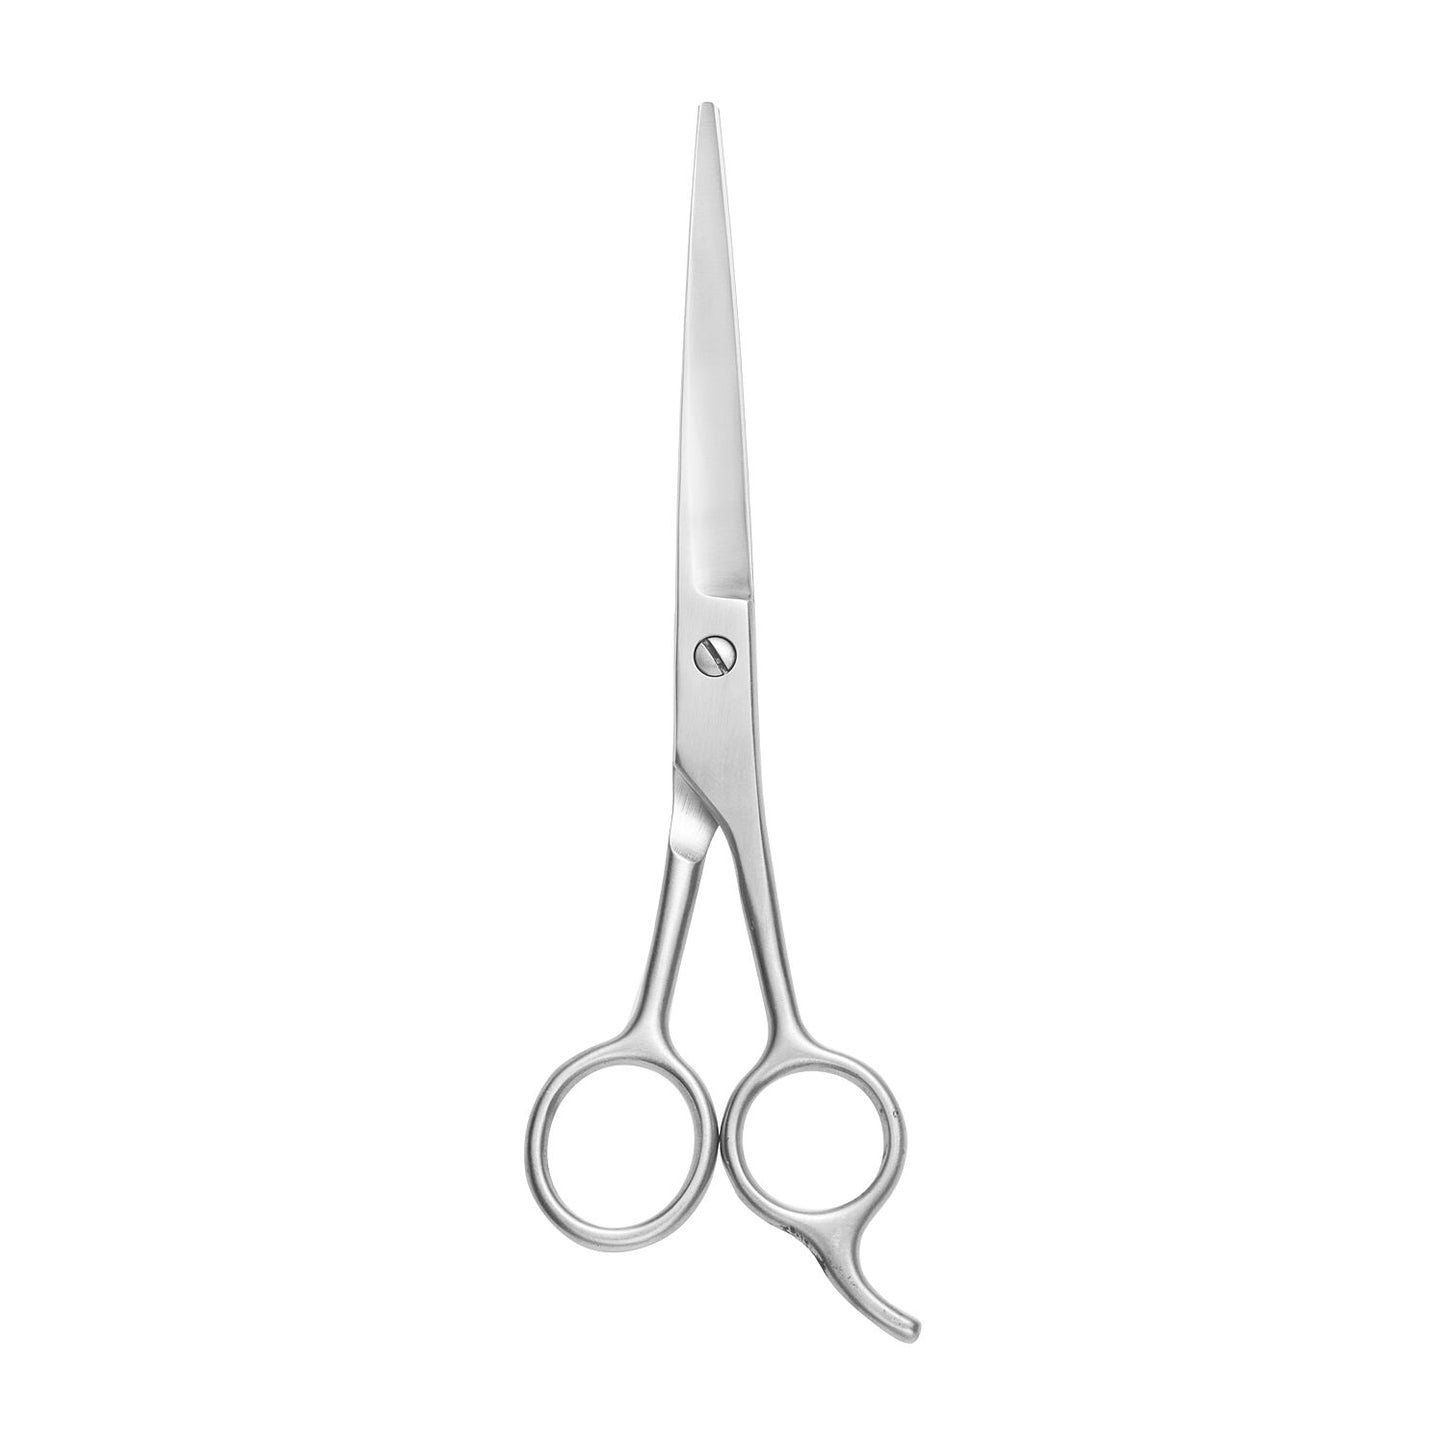 Salon Care Styling Shears 6.5 inches